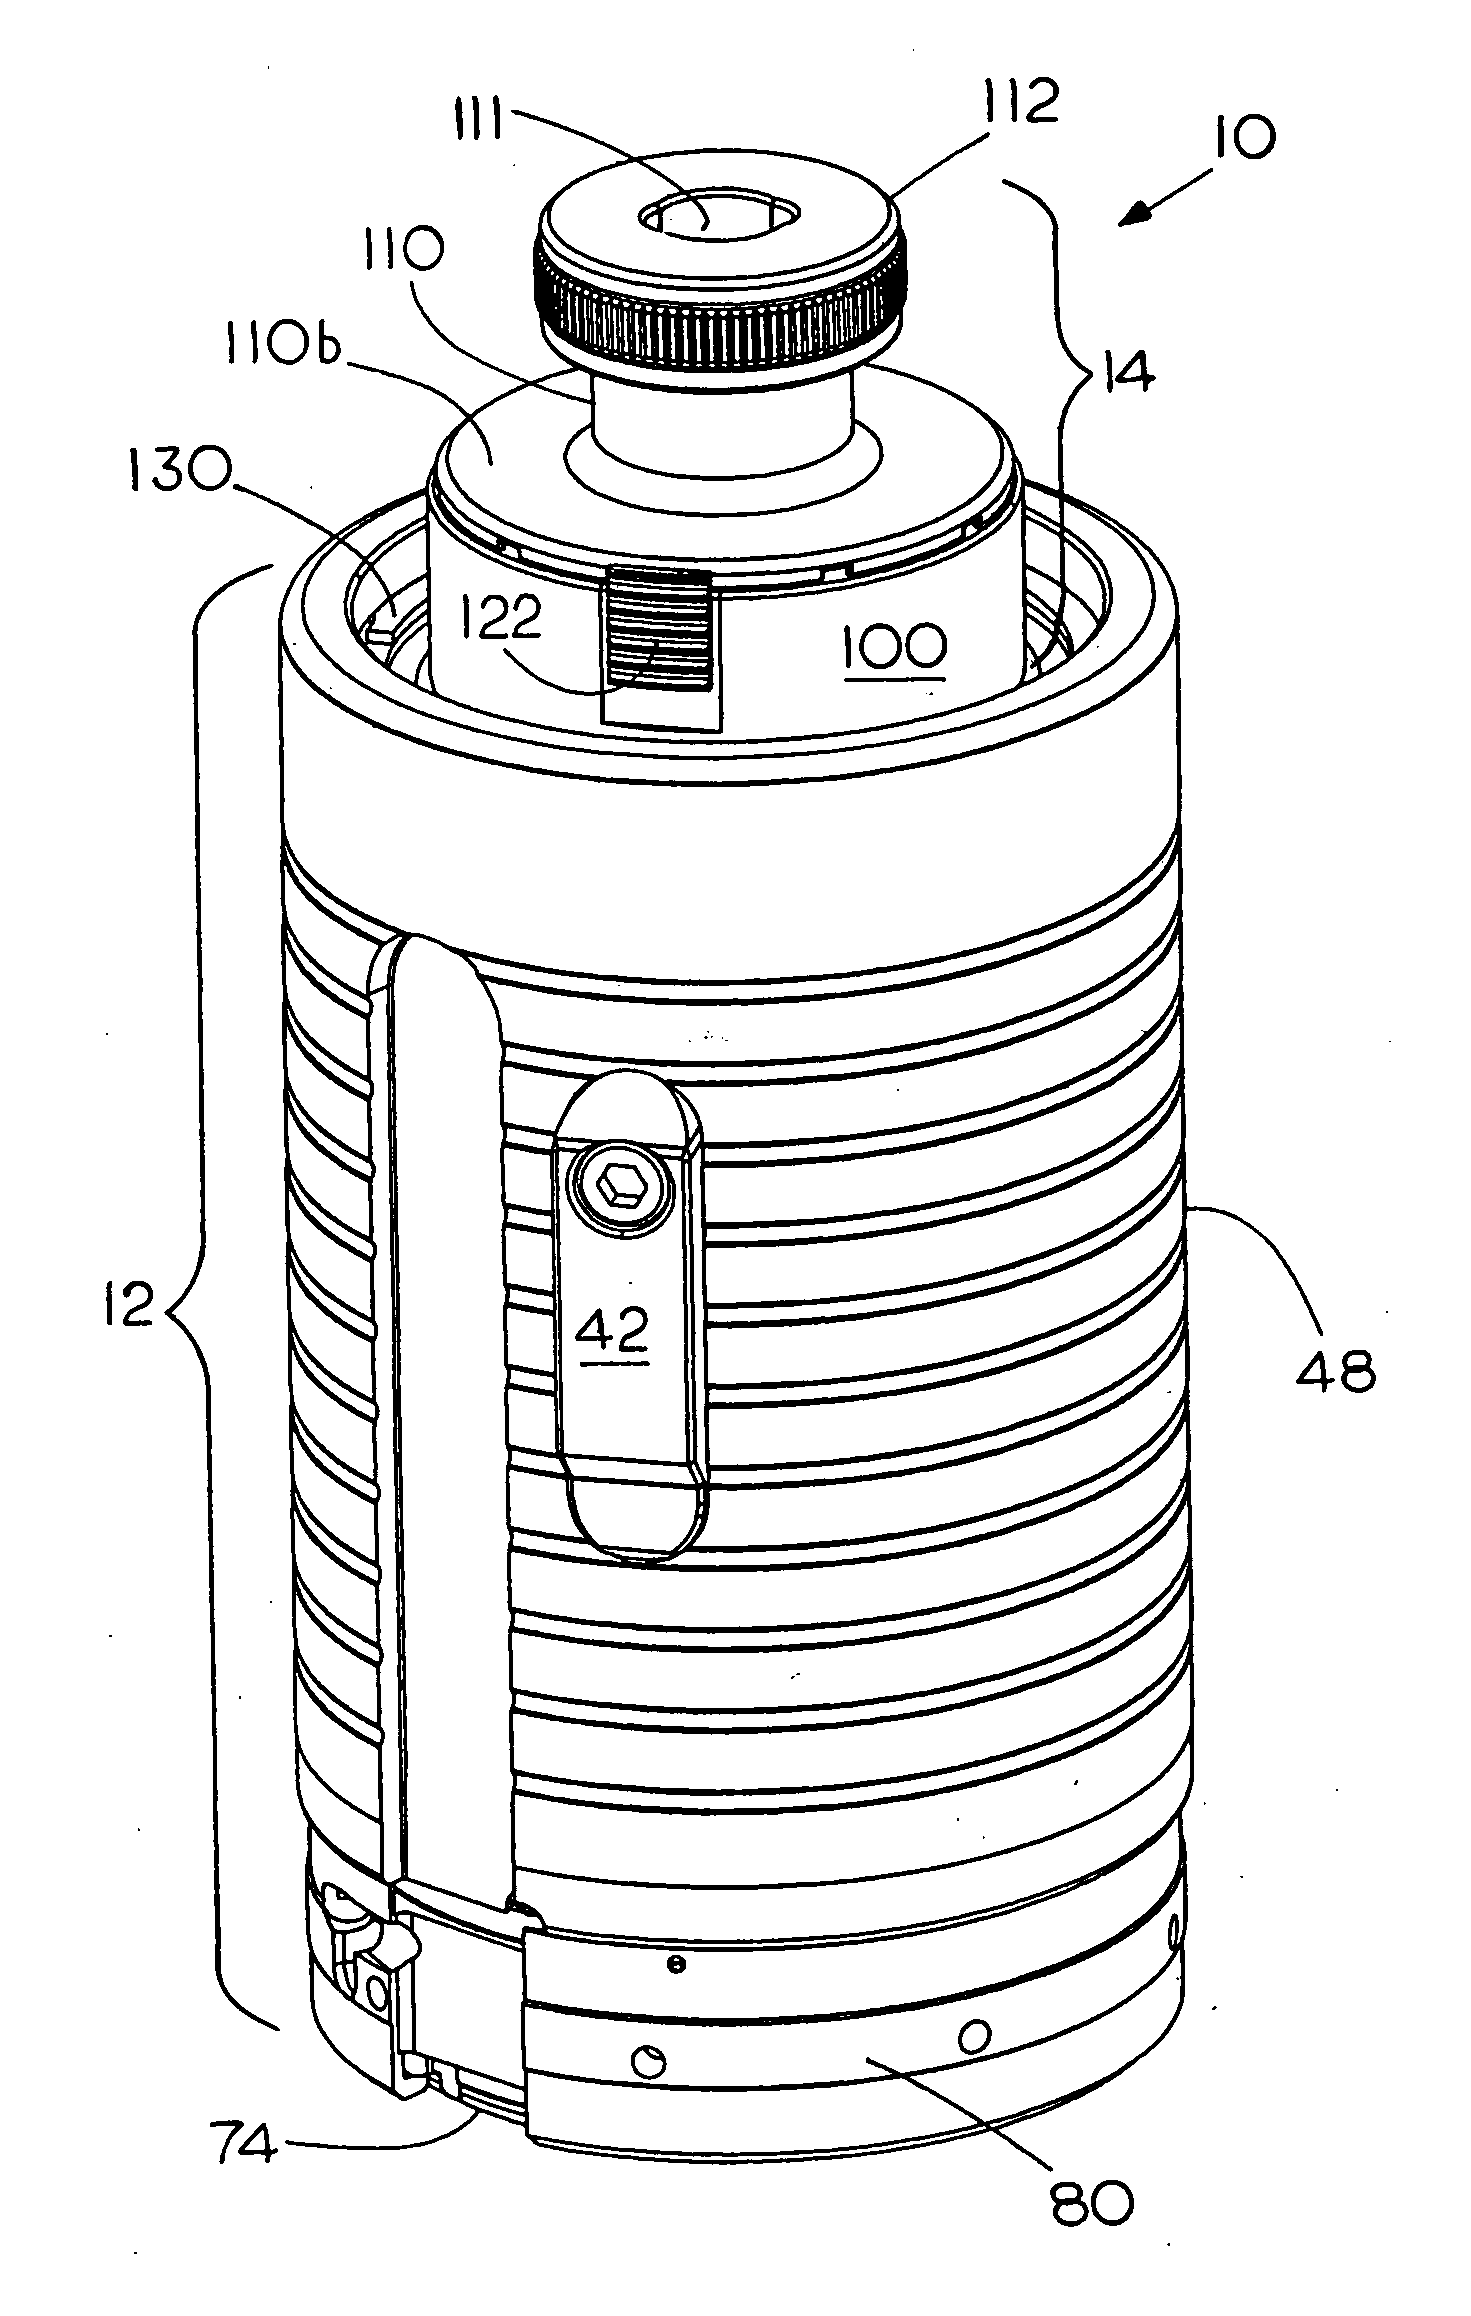 Punch device with adjustment subassembly as retrofit insert or as original equipment